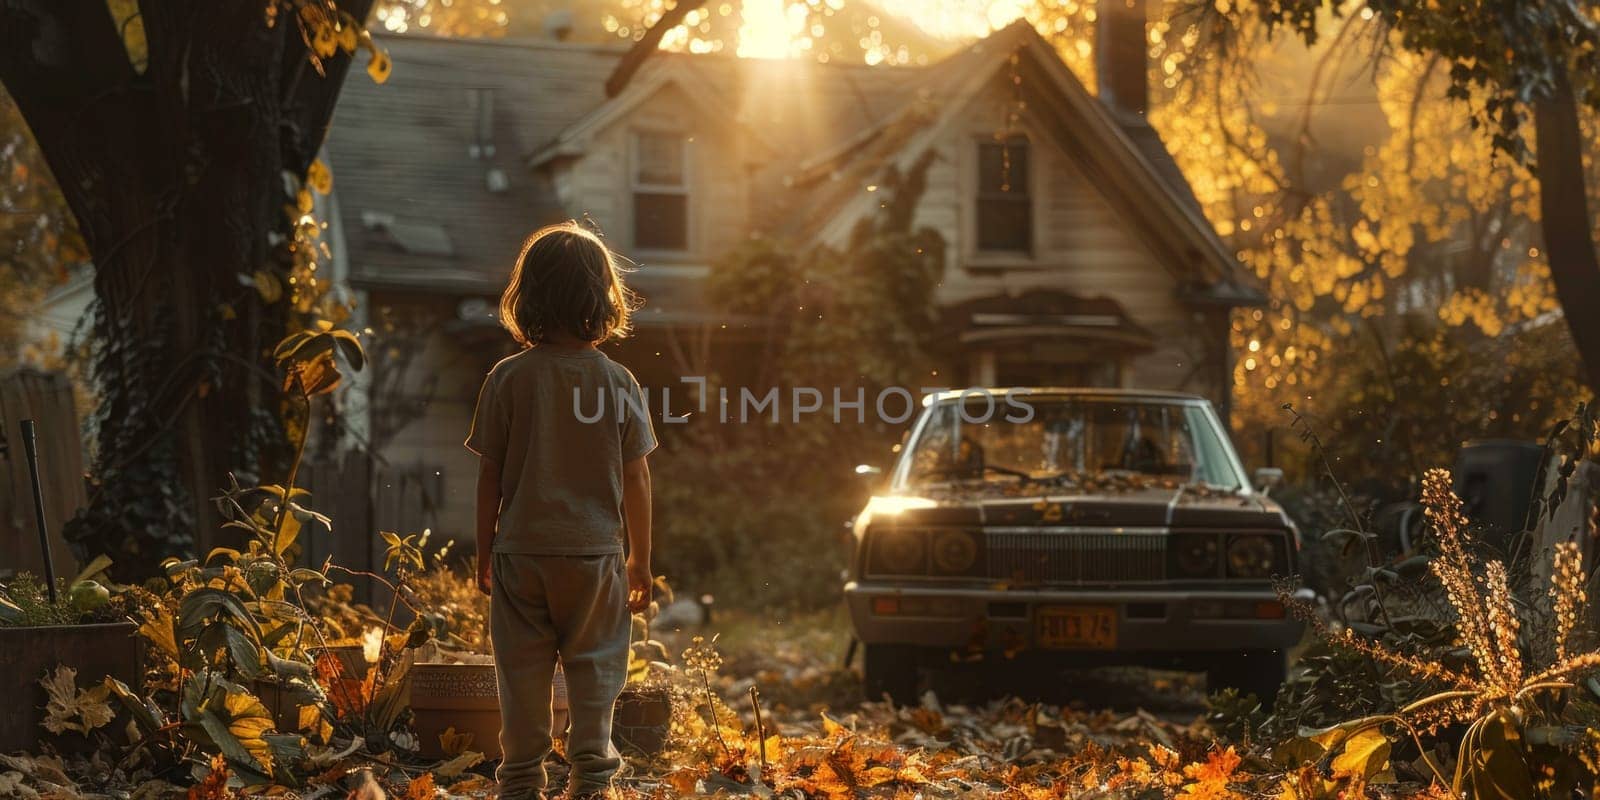 A child standing in front of a car parked in a yard as part of a family vacation.